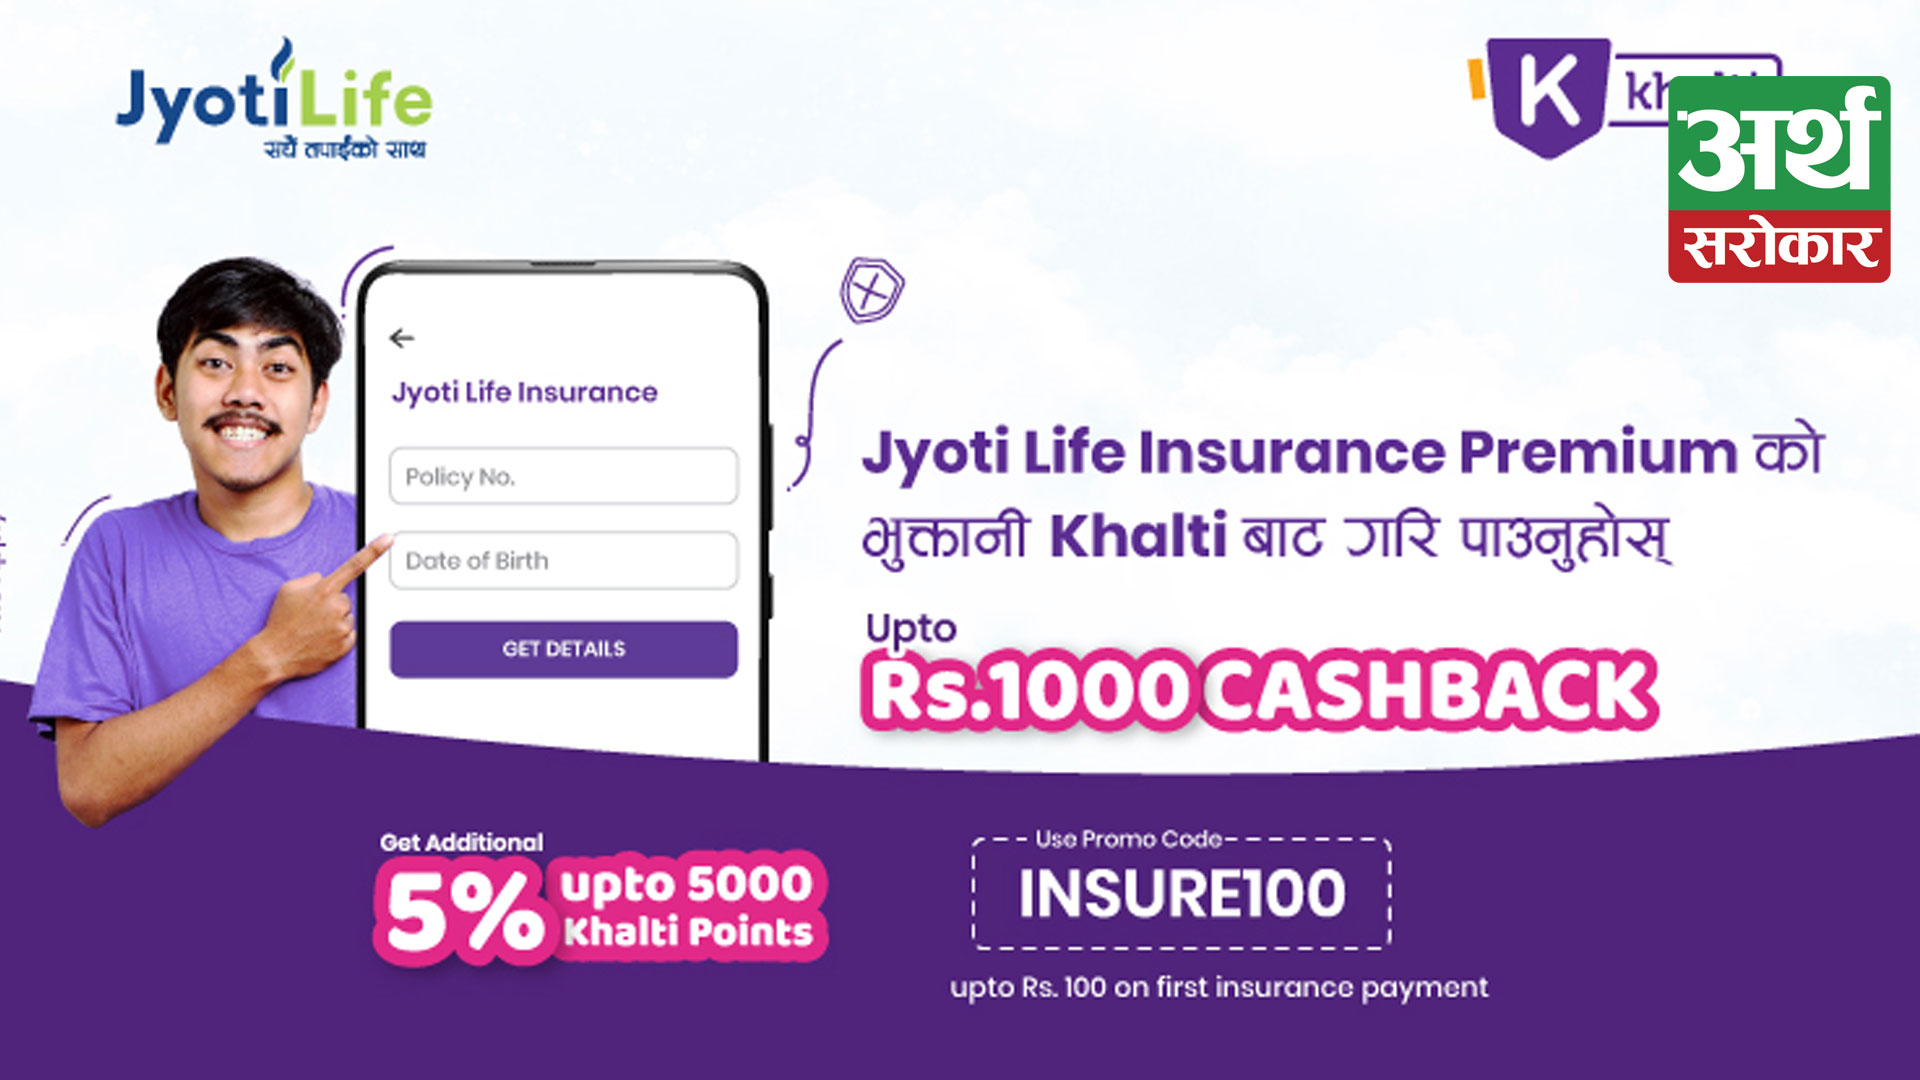 Khalti to facilitate cashback upto Rs. 1000 from on Jyoti Life Insurance Premium payment